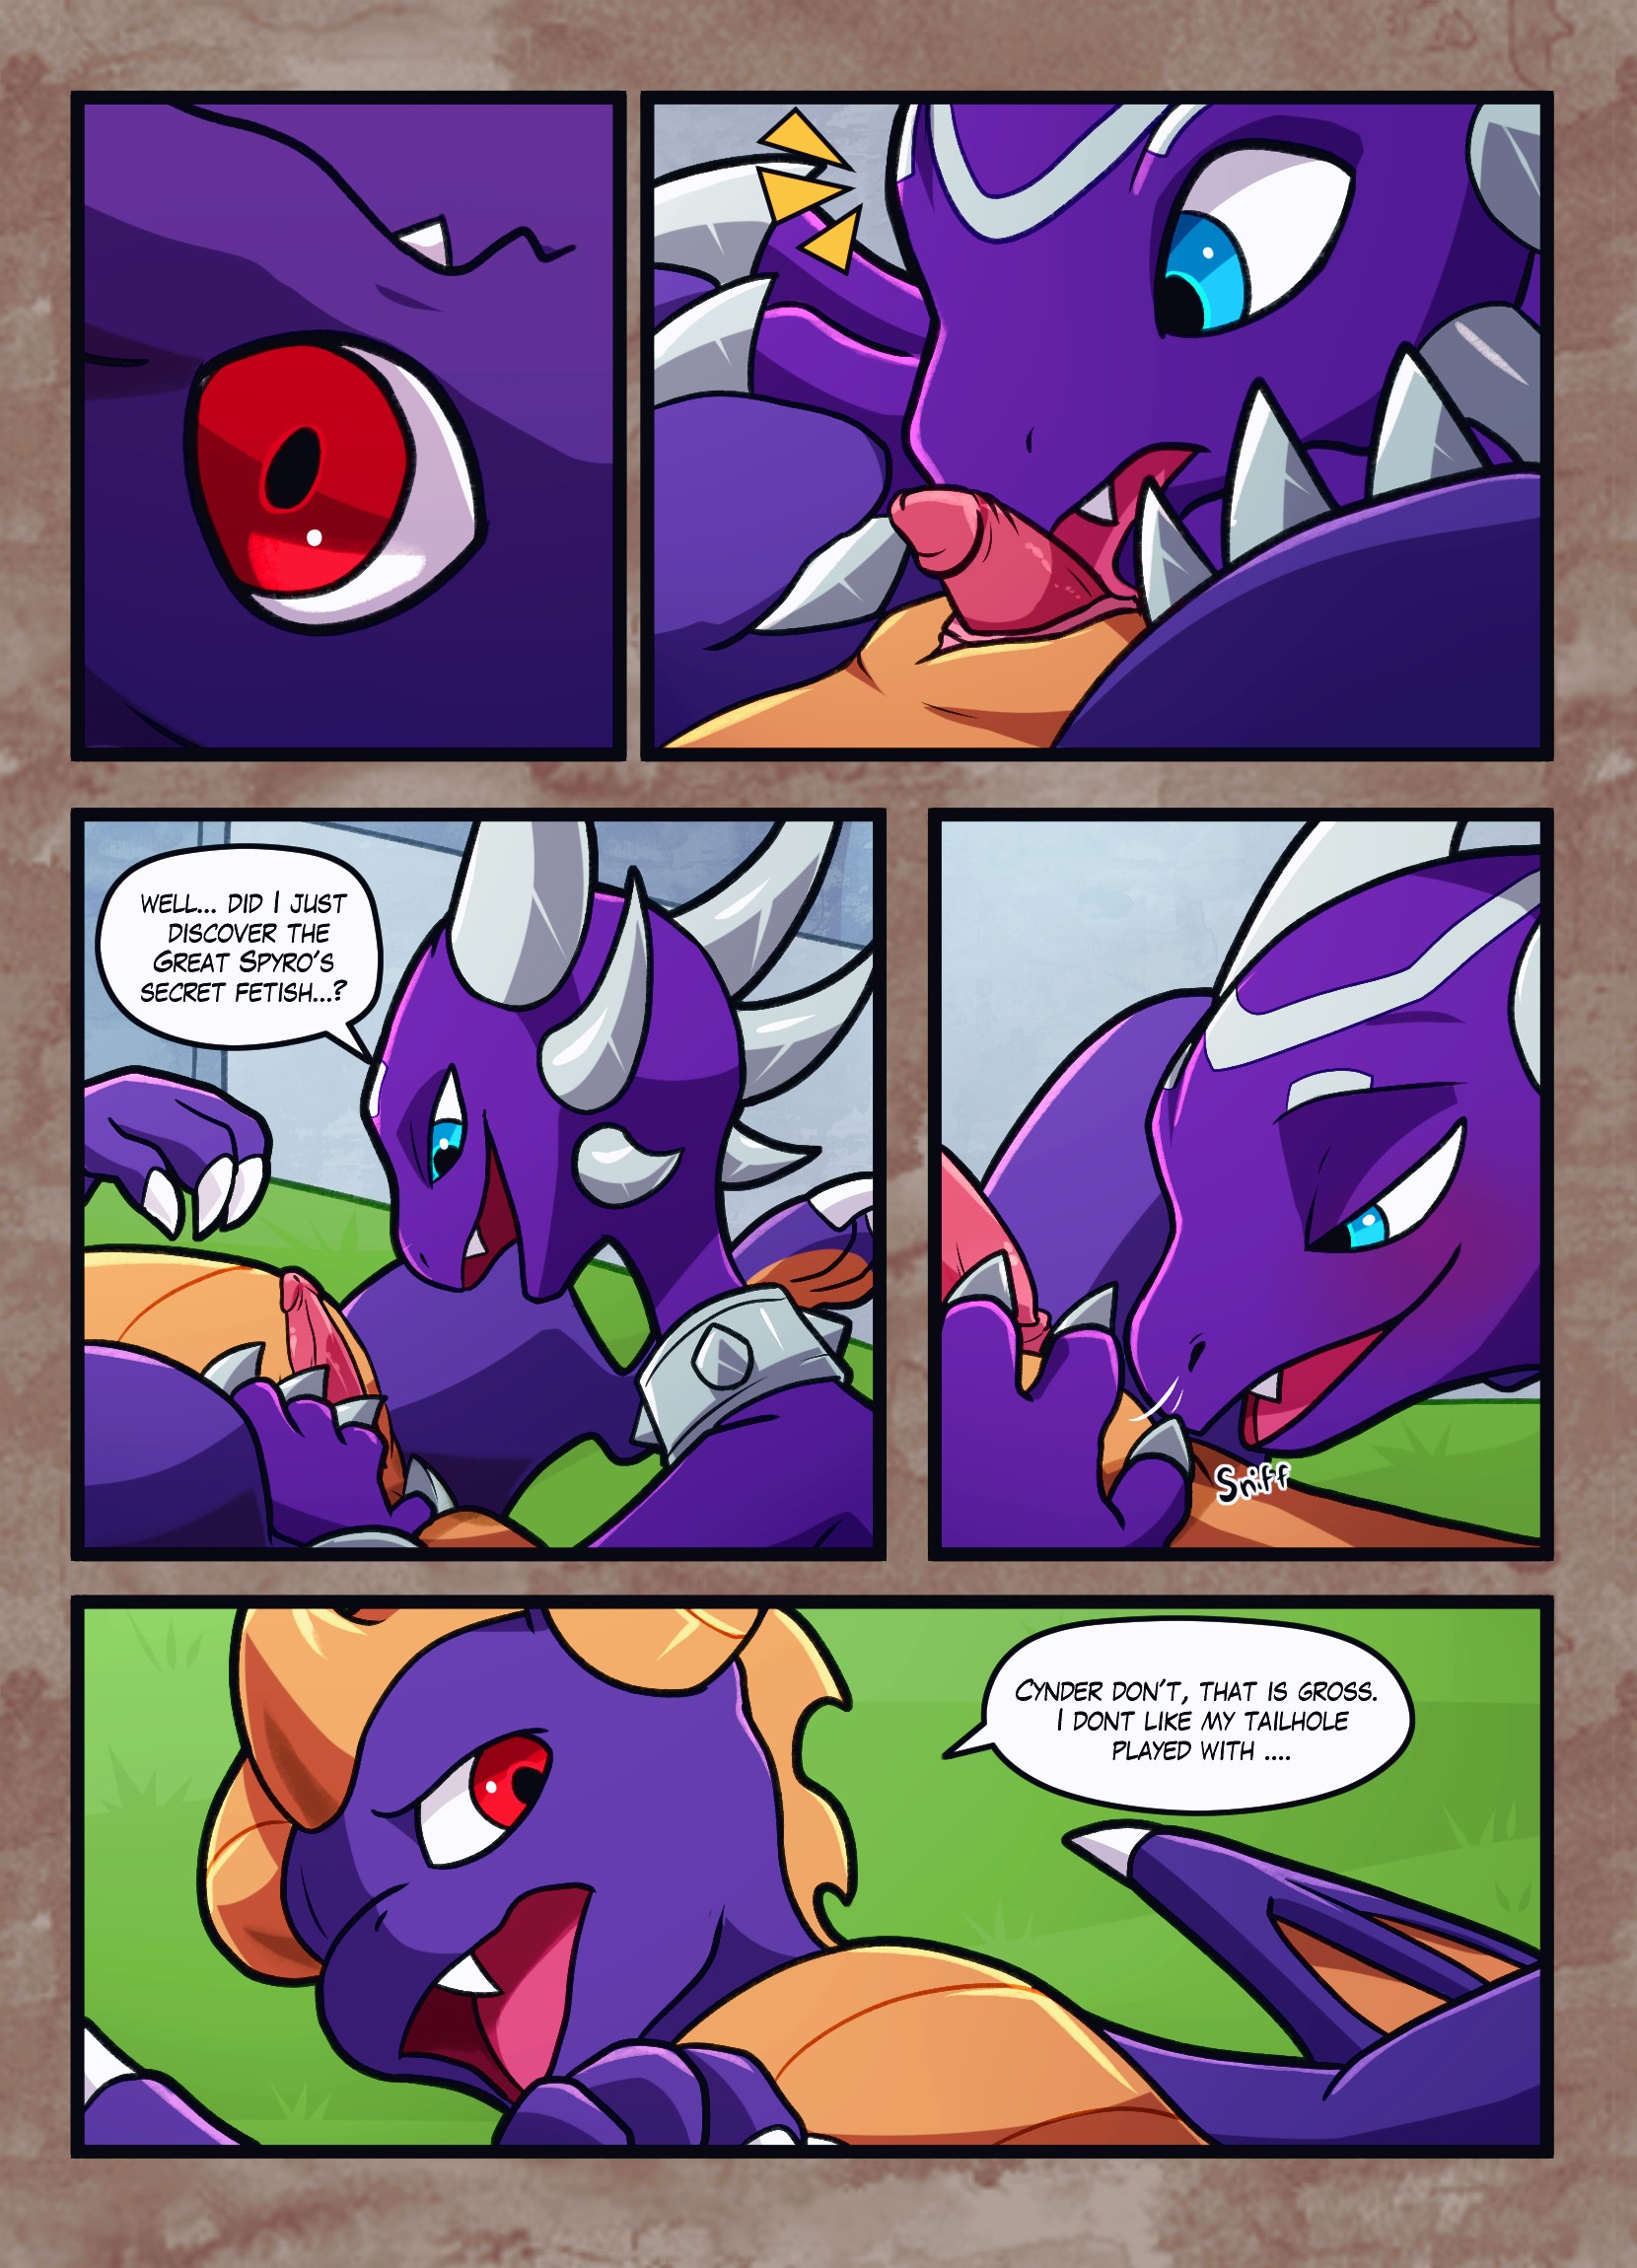 A Friend In Need porn comic page 020